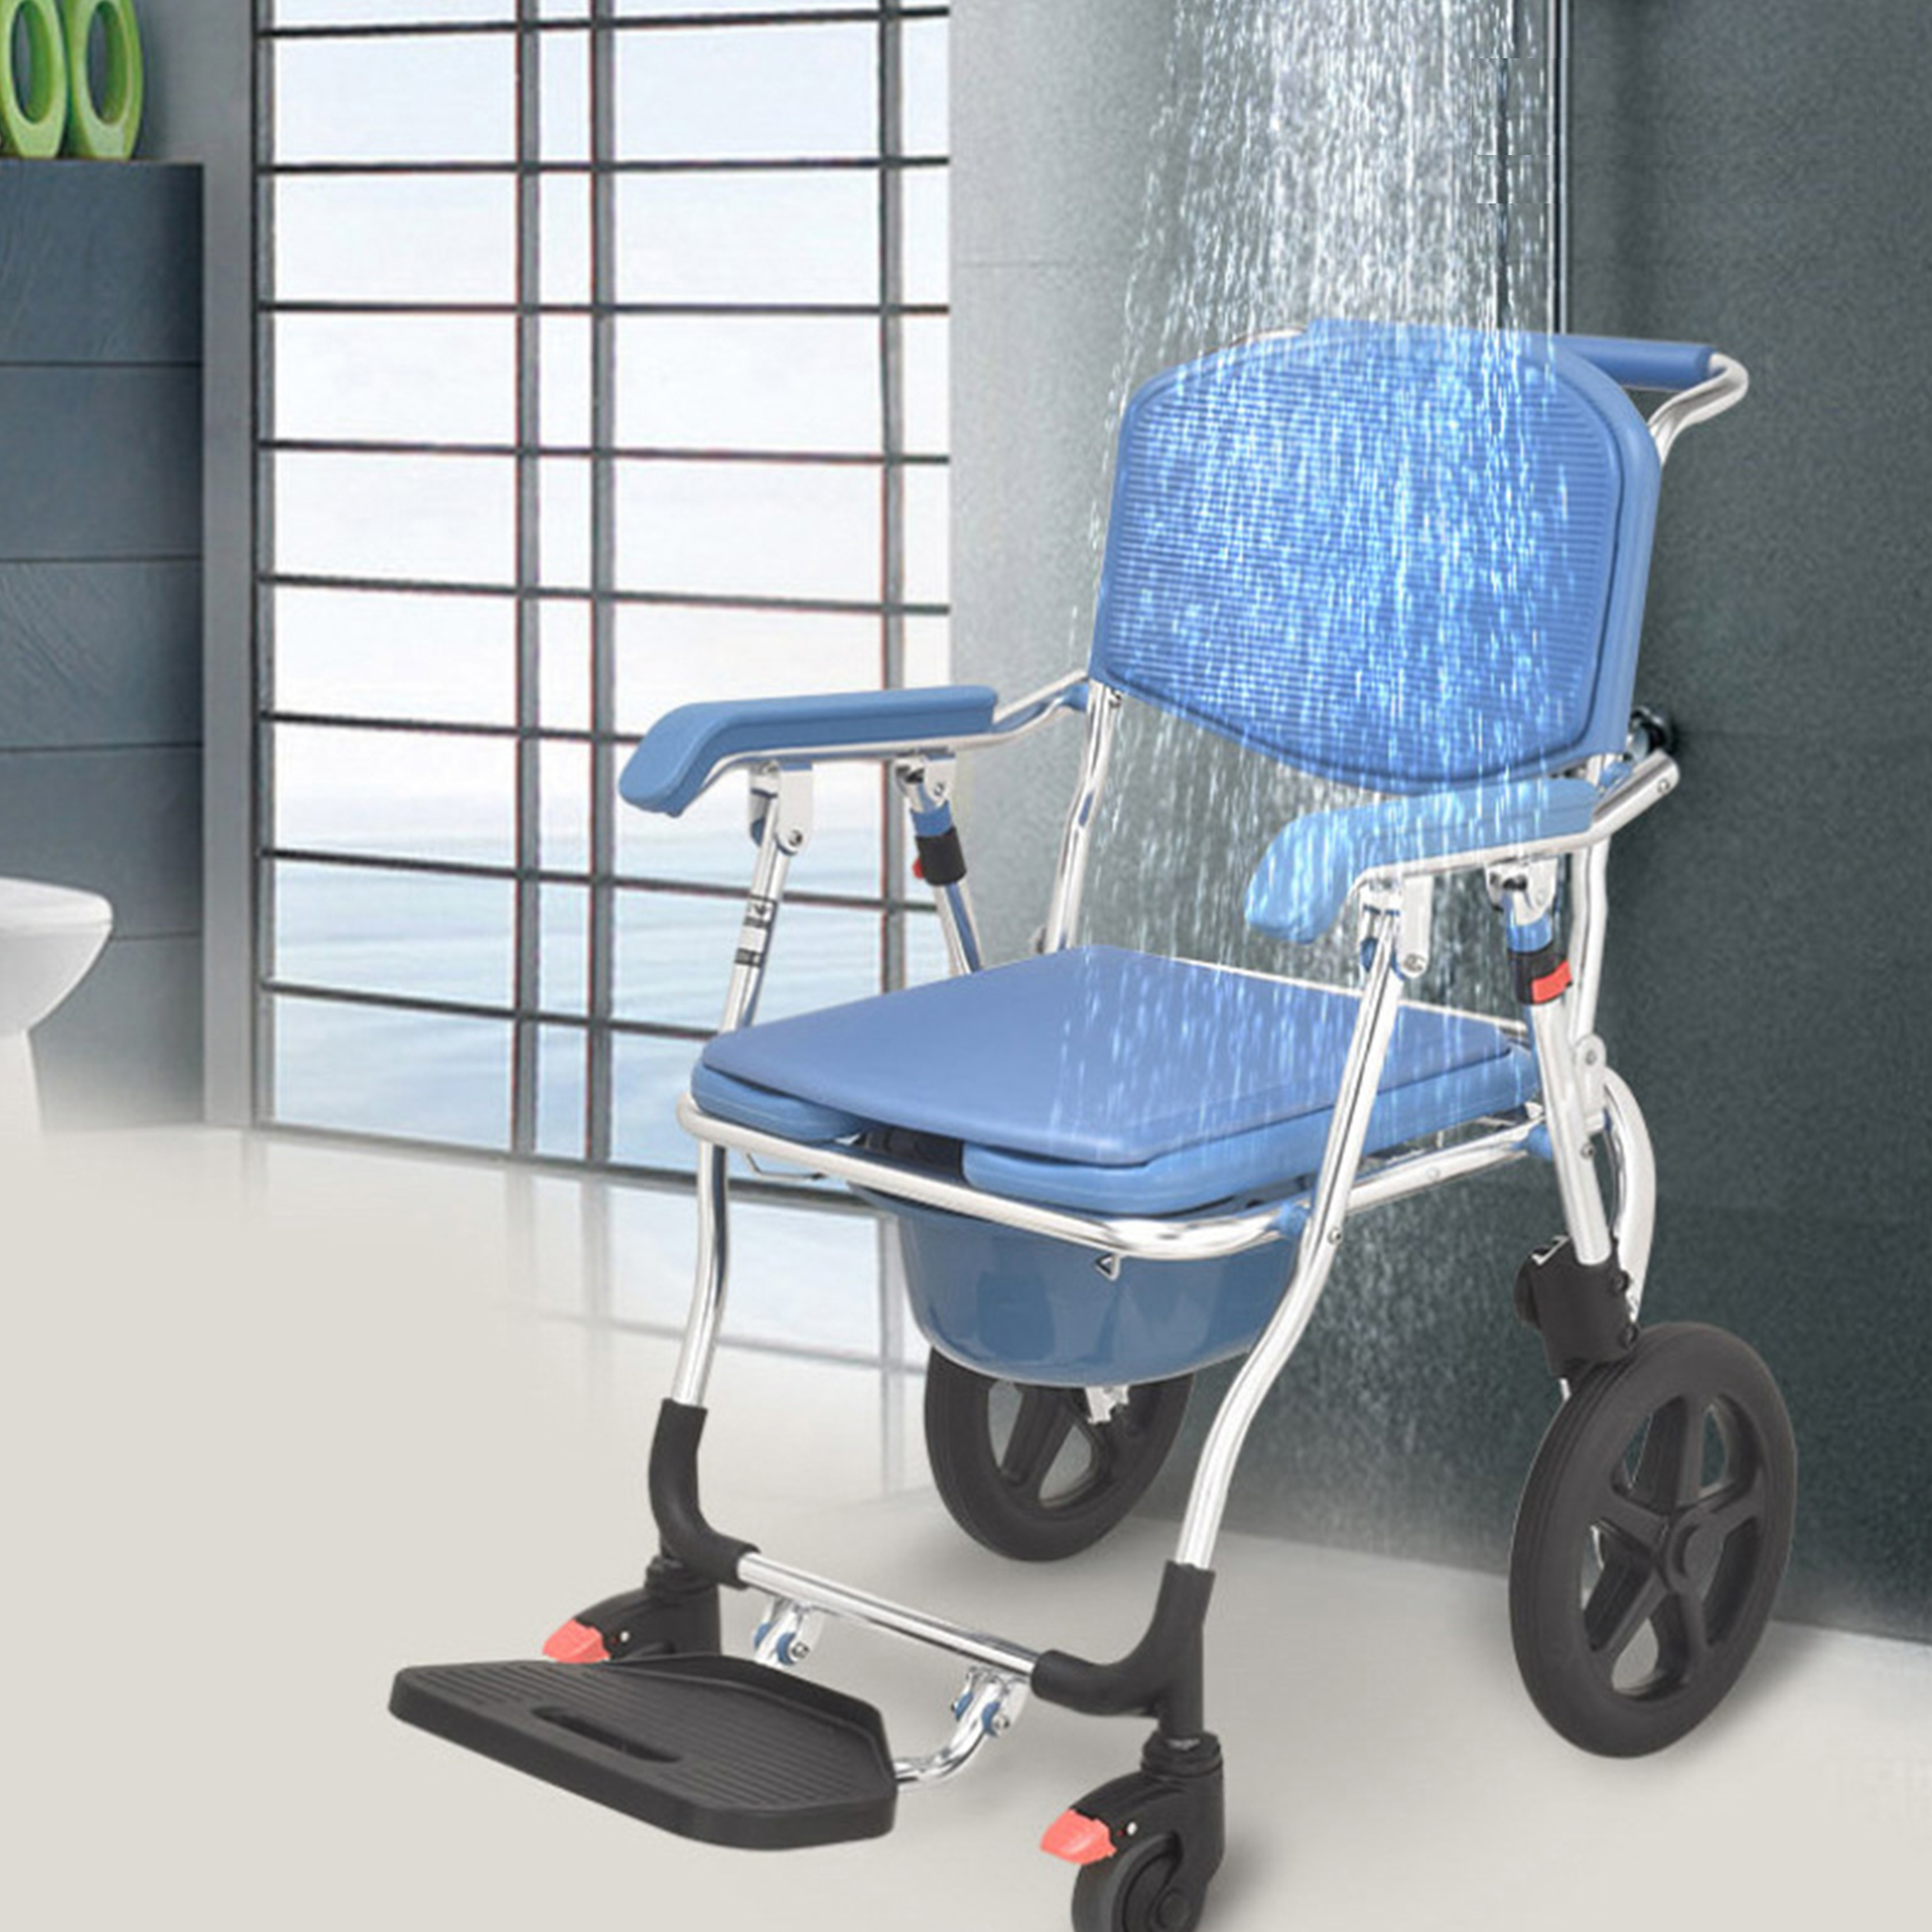 TCM6991 9.5kg good price shower chair wheelchair hospital toilet commode chair with bedp for the elderly